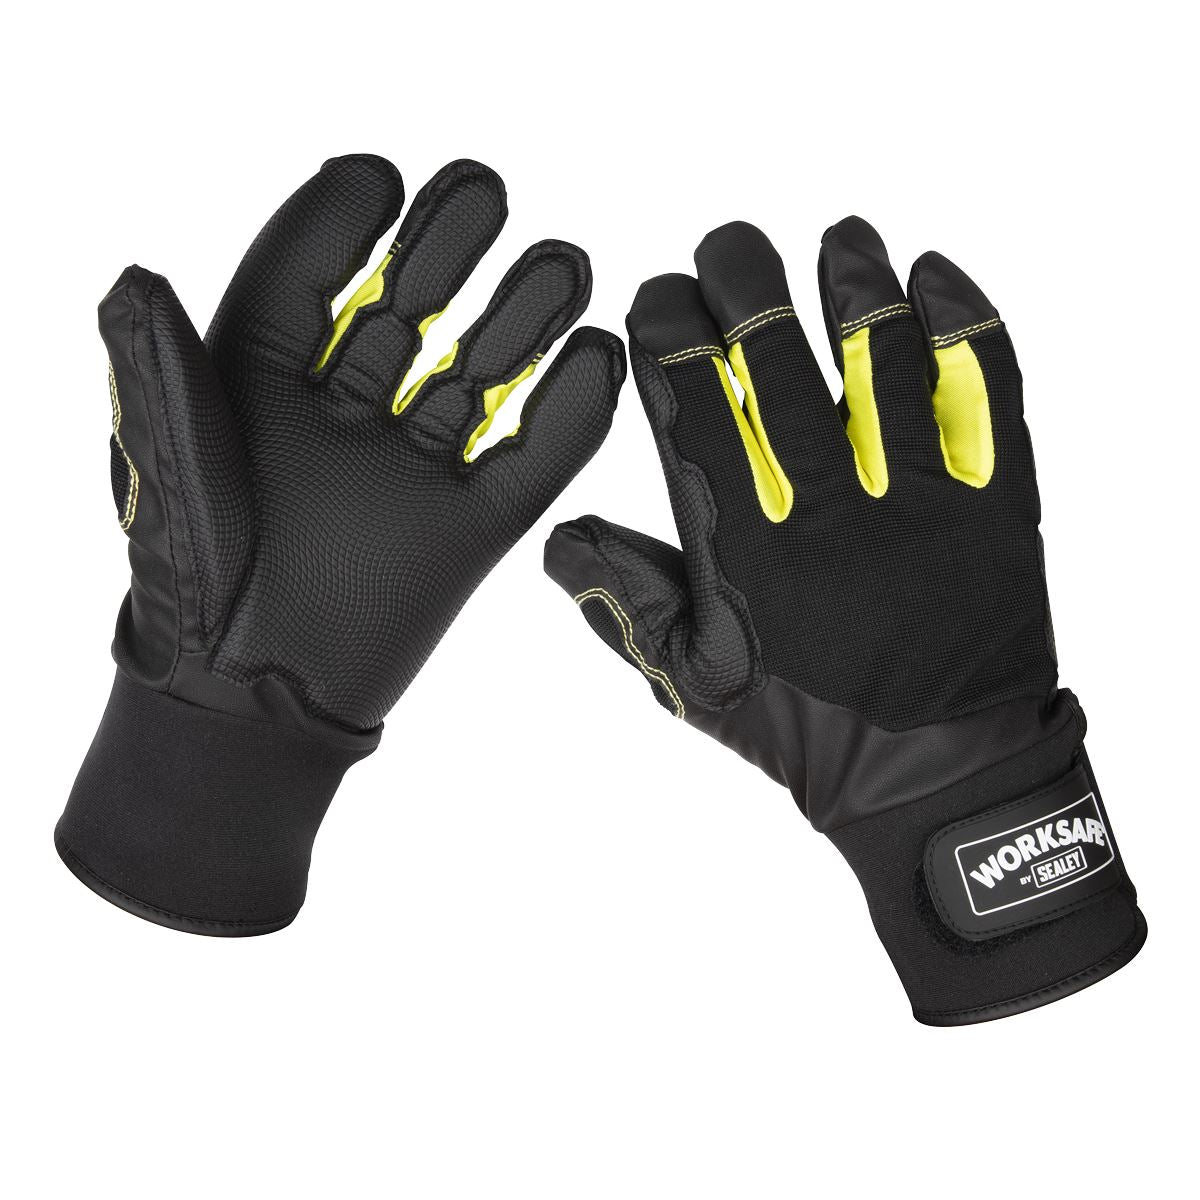 Worksafe by Sealey Anti-Vibration Gloves Large - Pair